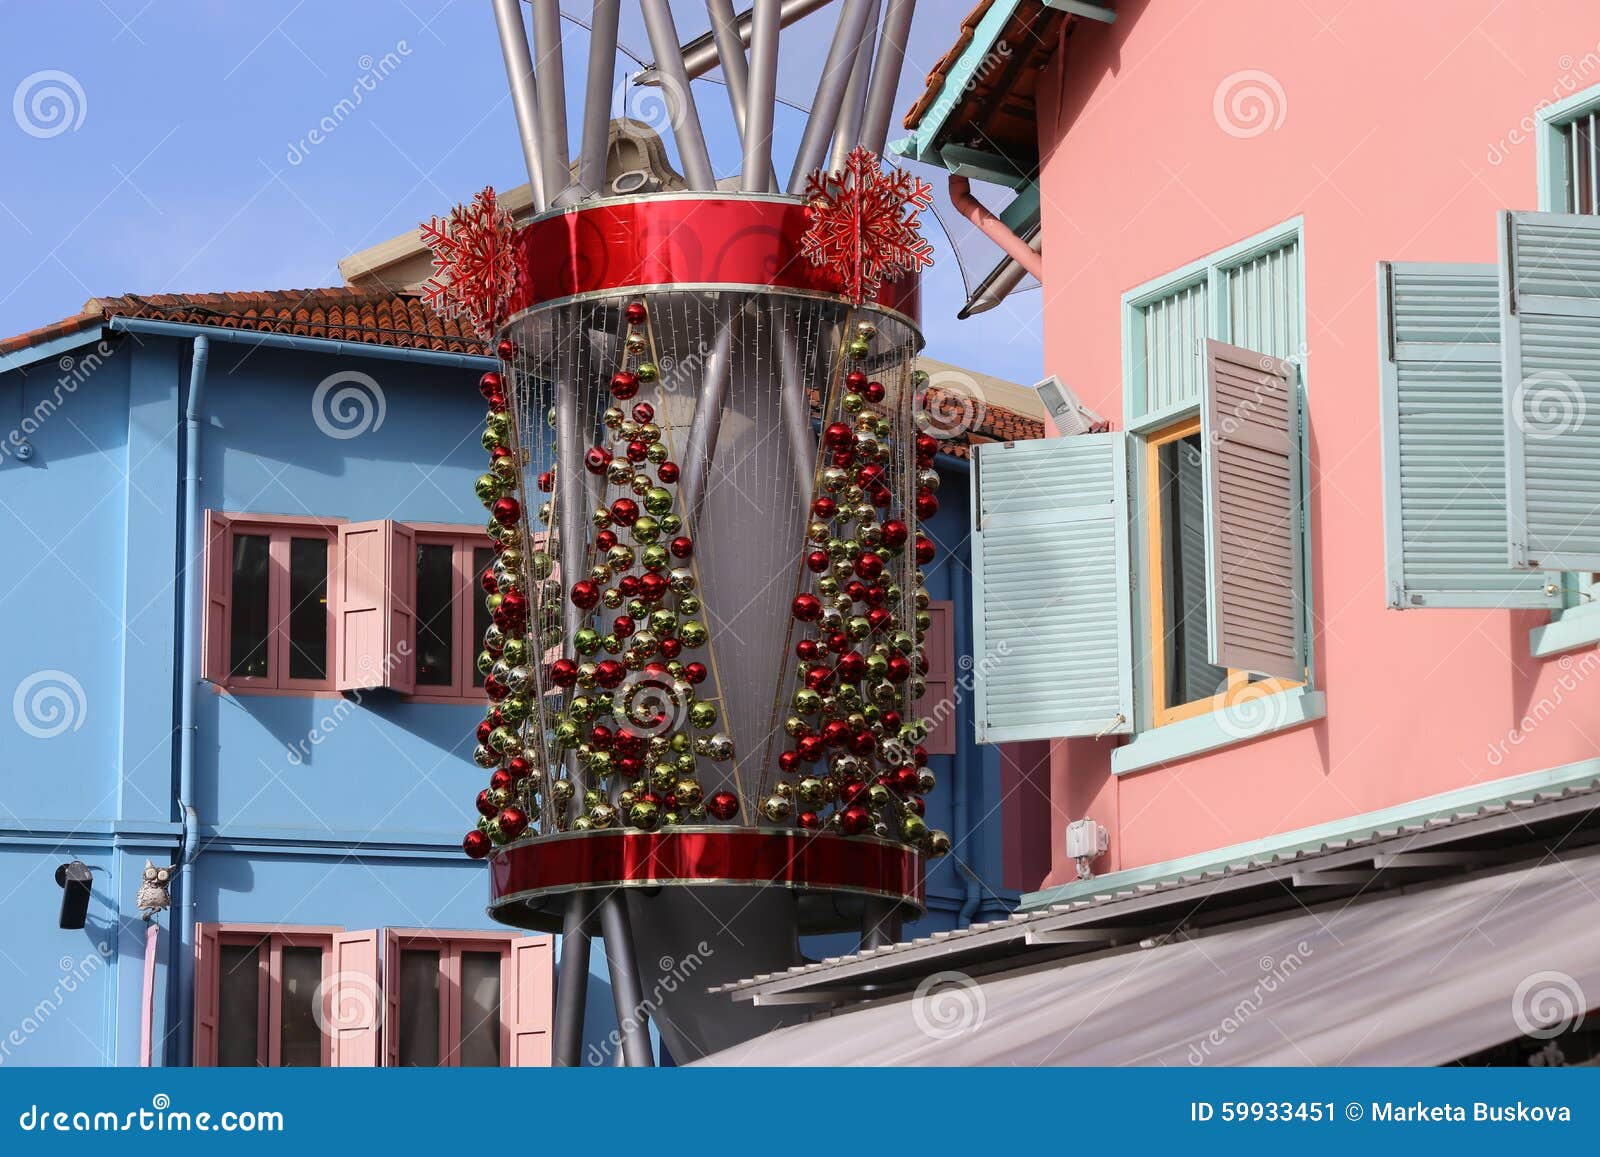 Christmas Decorations in Singapore Stock Image  Image of star, balls